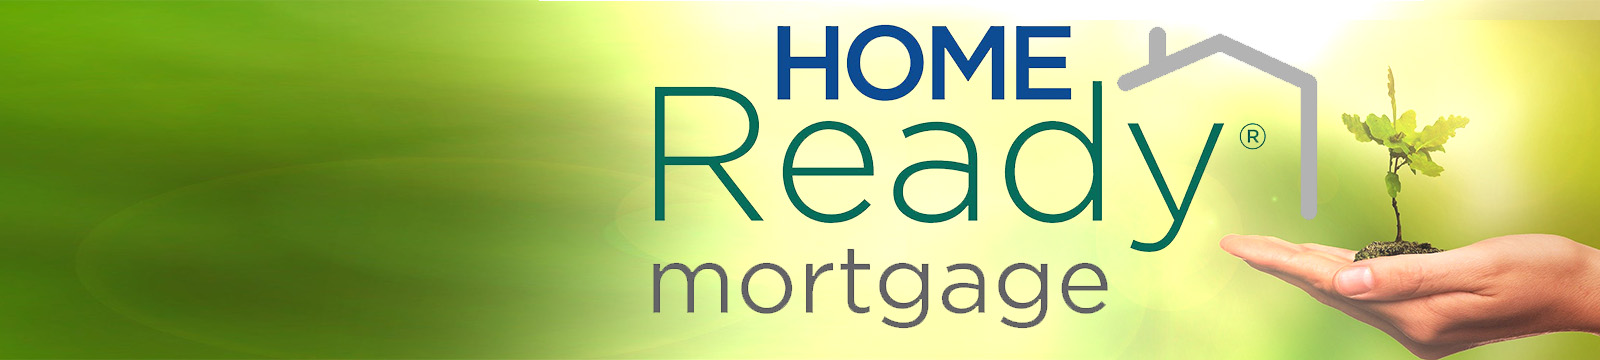 Image of a hand facing palm up holding a tree seedling beside the Home Ready Mortgage logo.